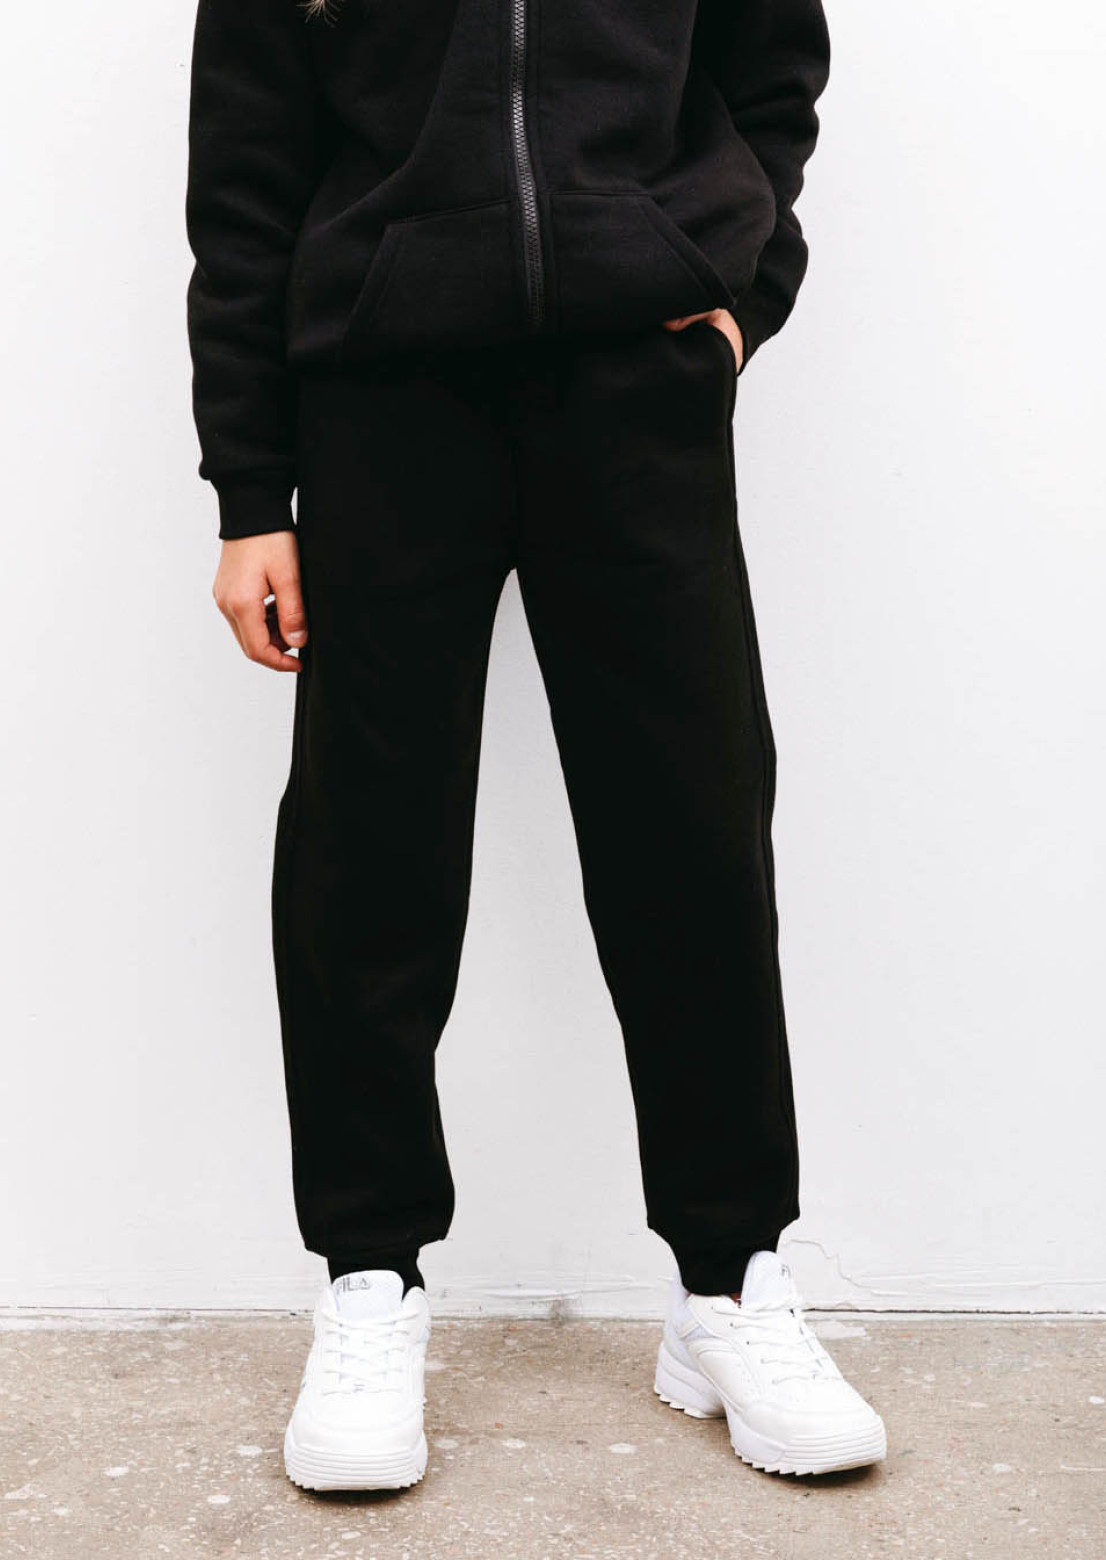 Black color kids footer trousers